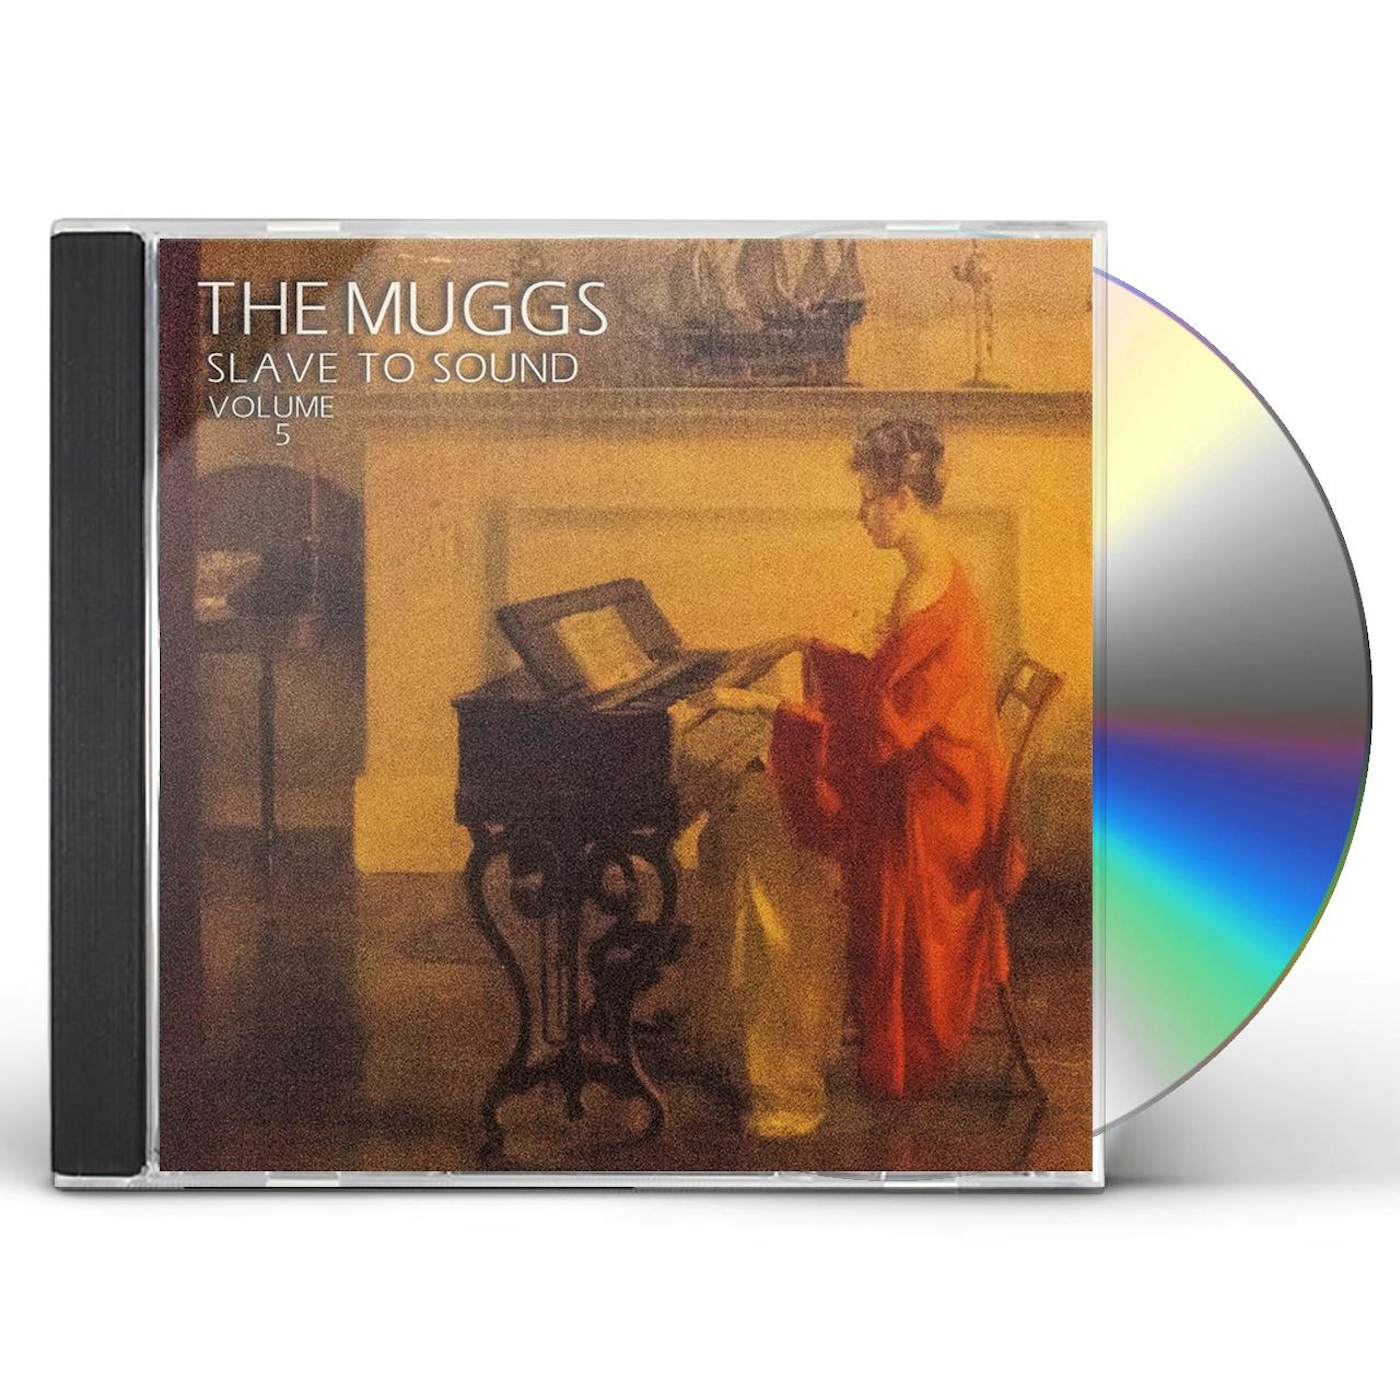 The Muggs SLAVE TO SOUND 5 CD